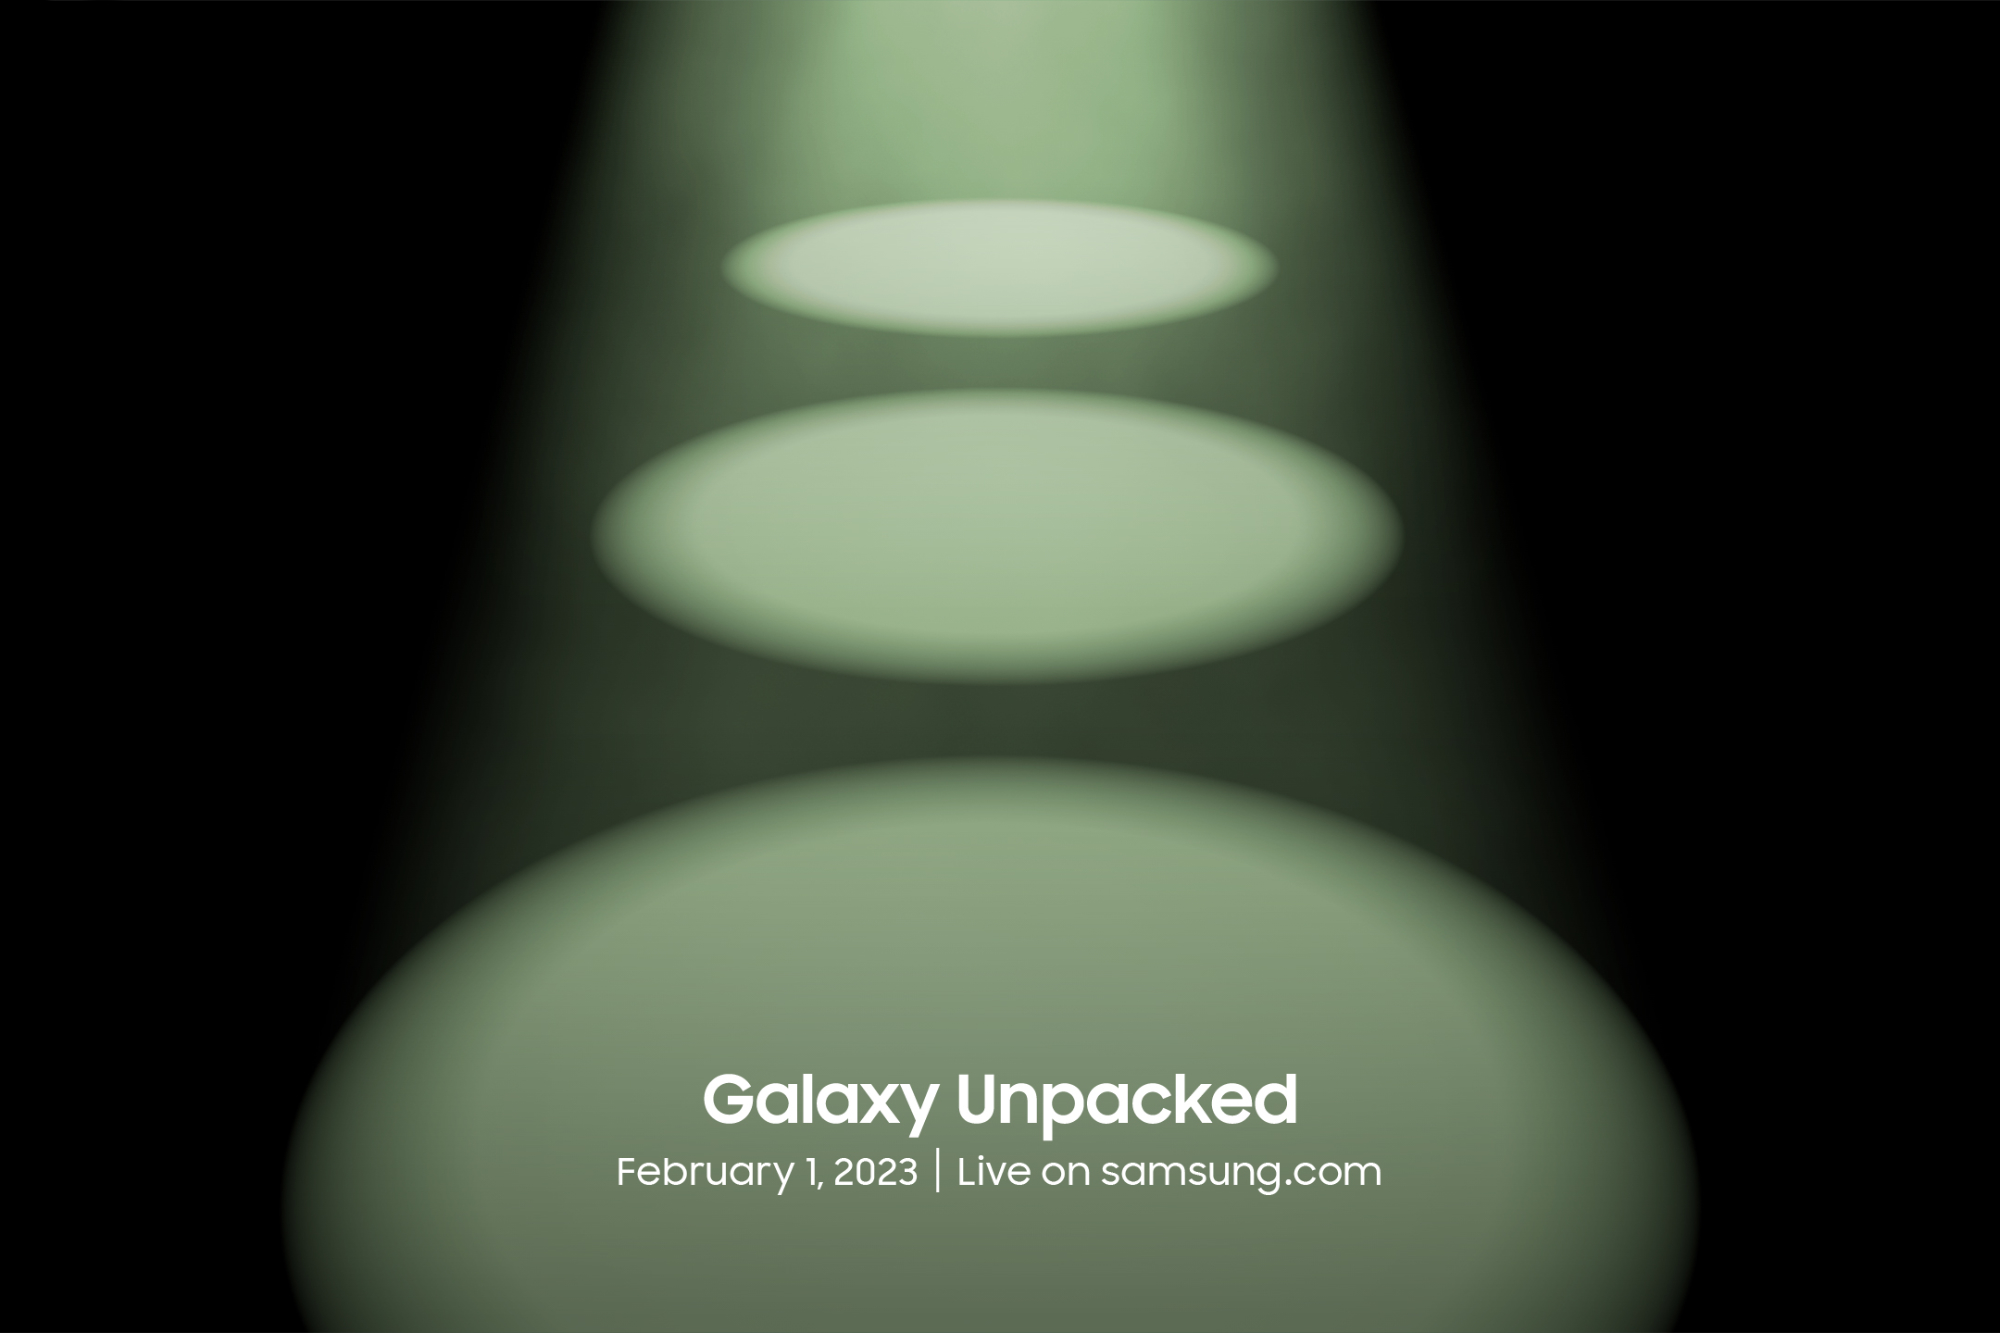 Event invite for Samsung Galaxy Unpacked February 2023.